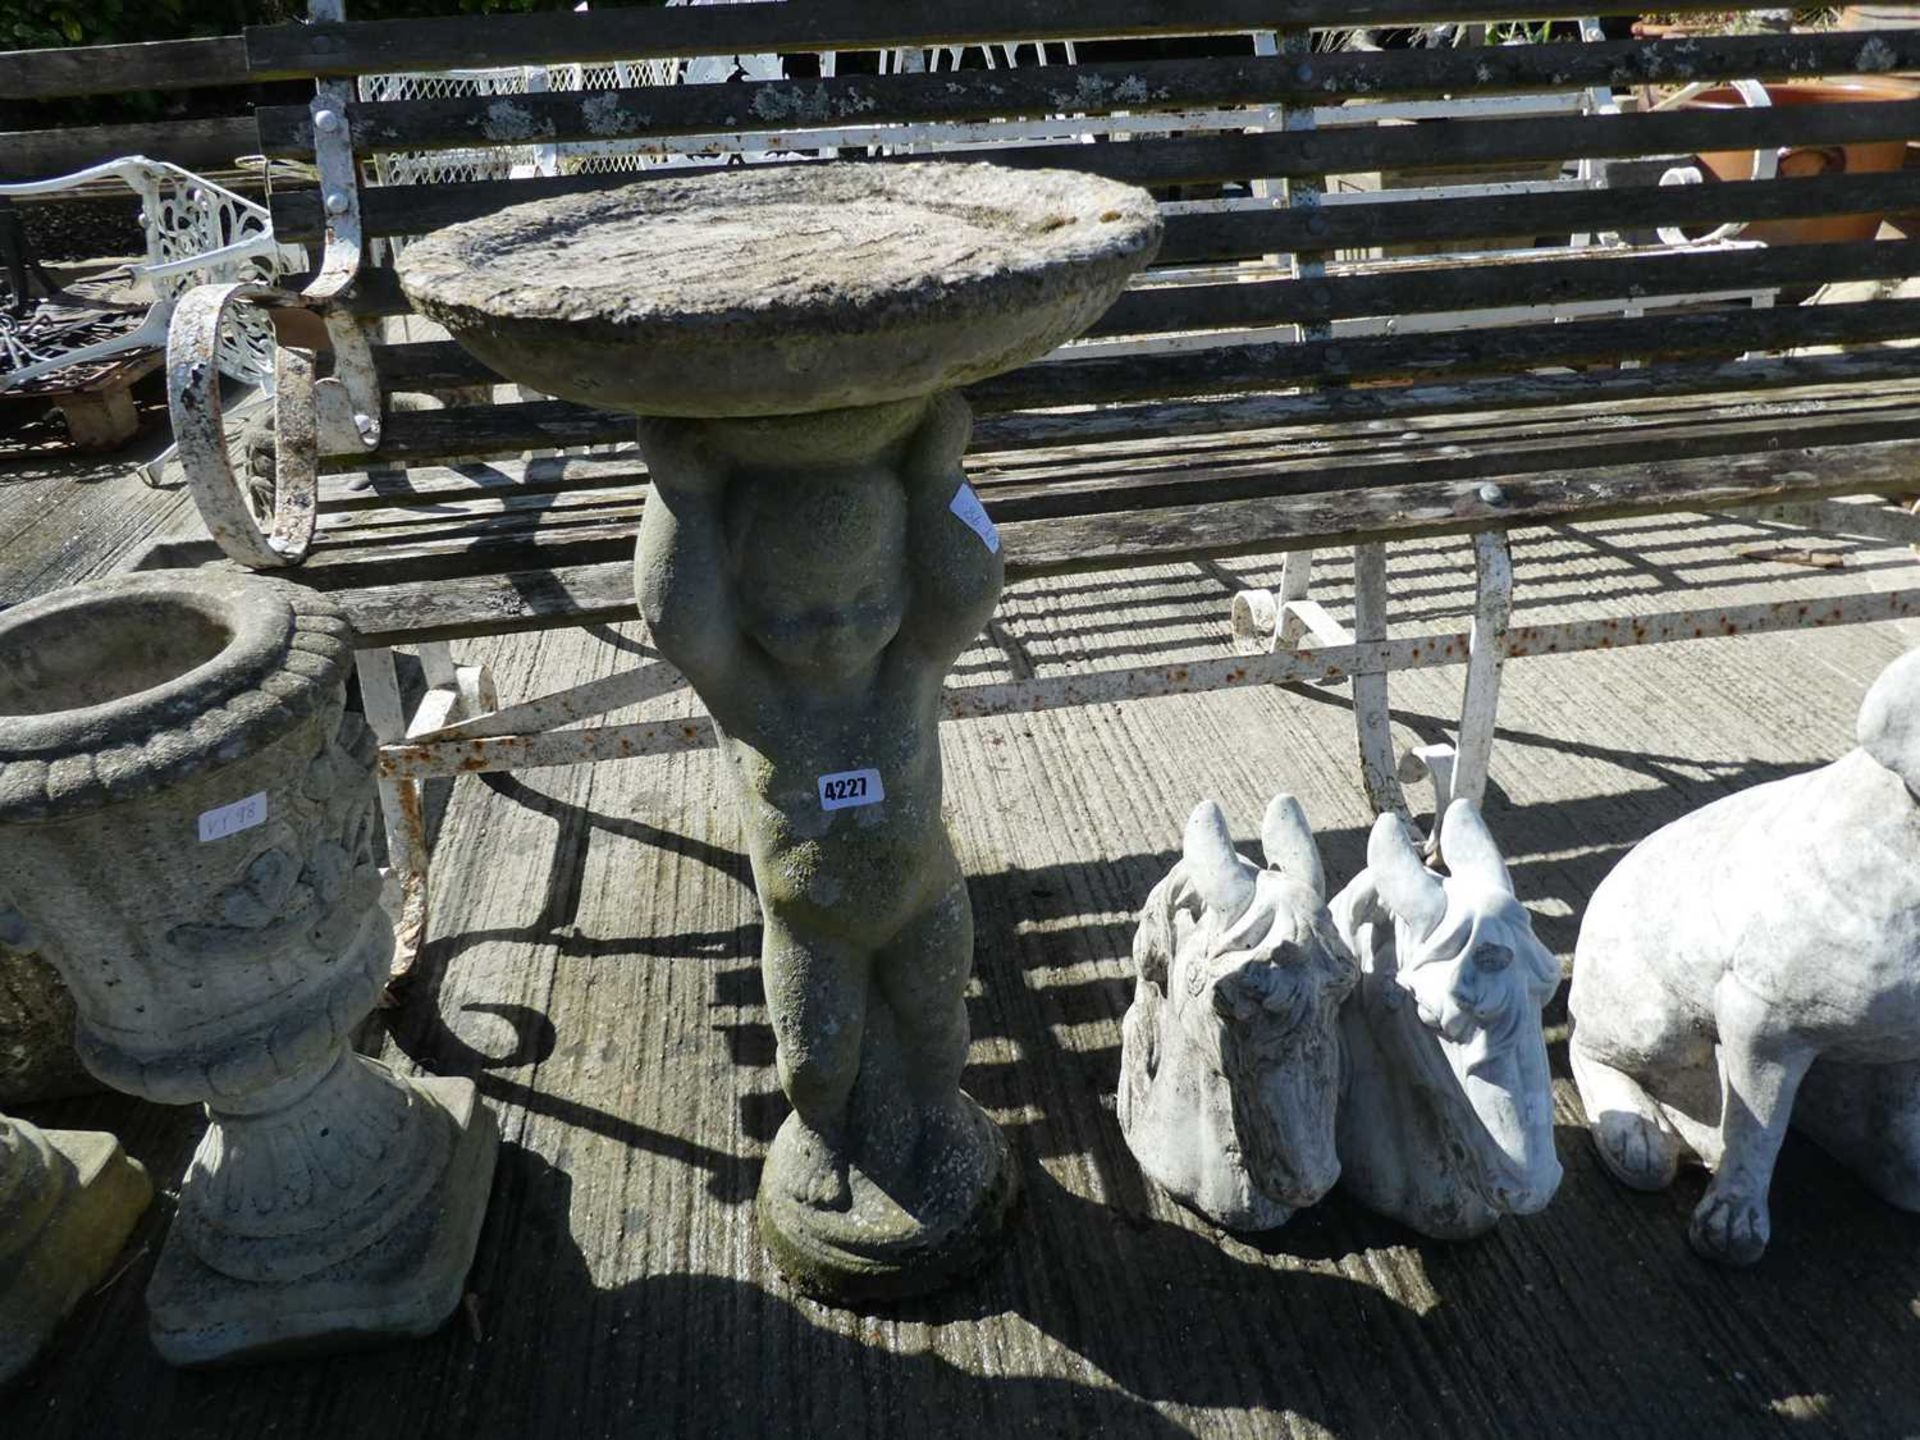 Concrete birdbath in the shape of a cherub holding a tray, including two concrete figures of horse